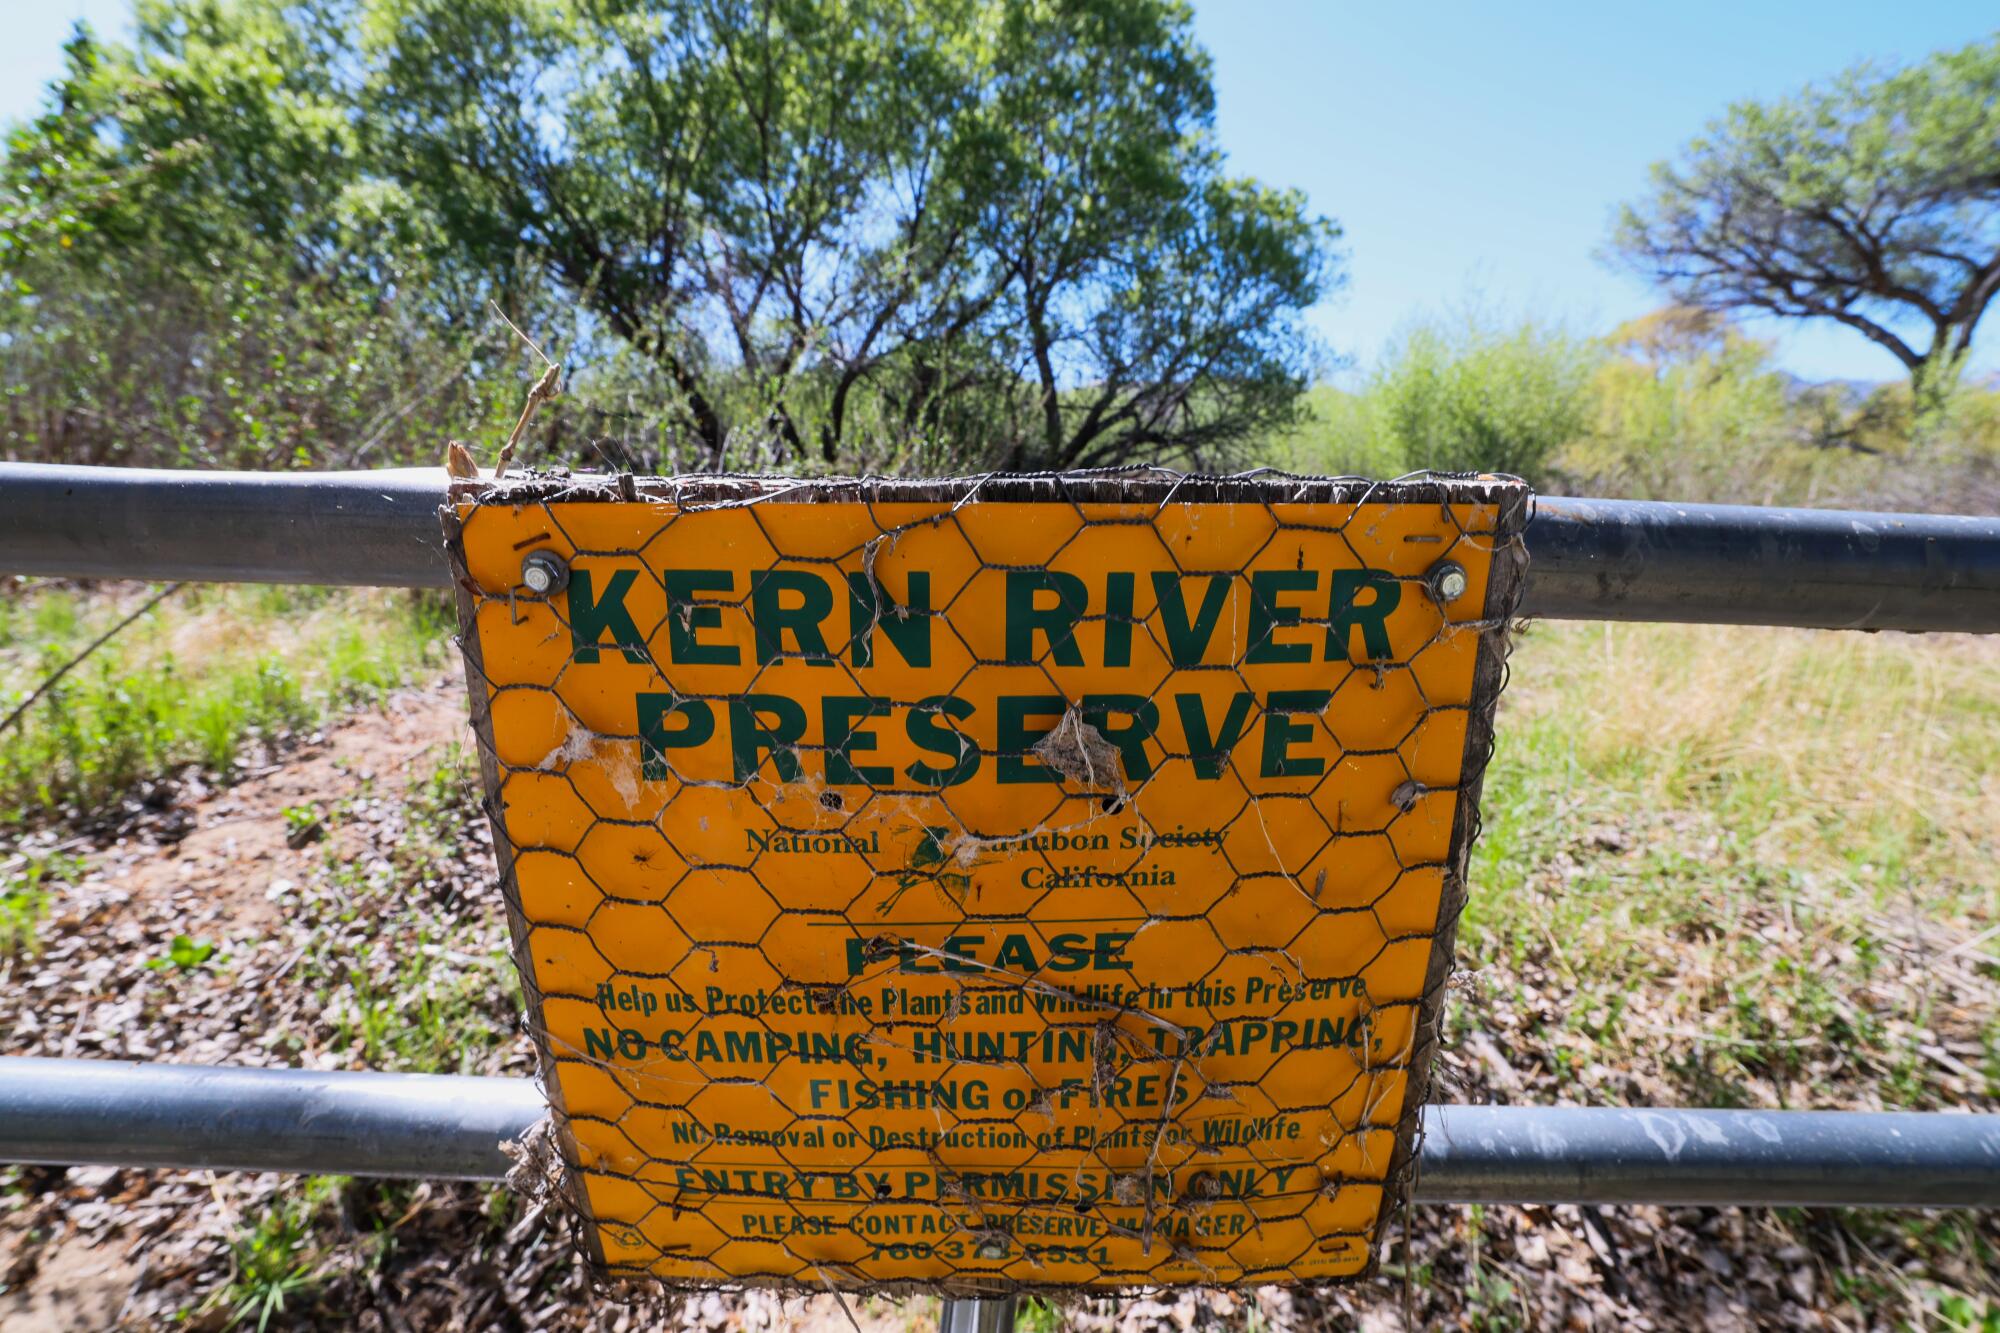 A sign reads "Kern River Preserve" on a gate, with trees in the background.